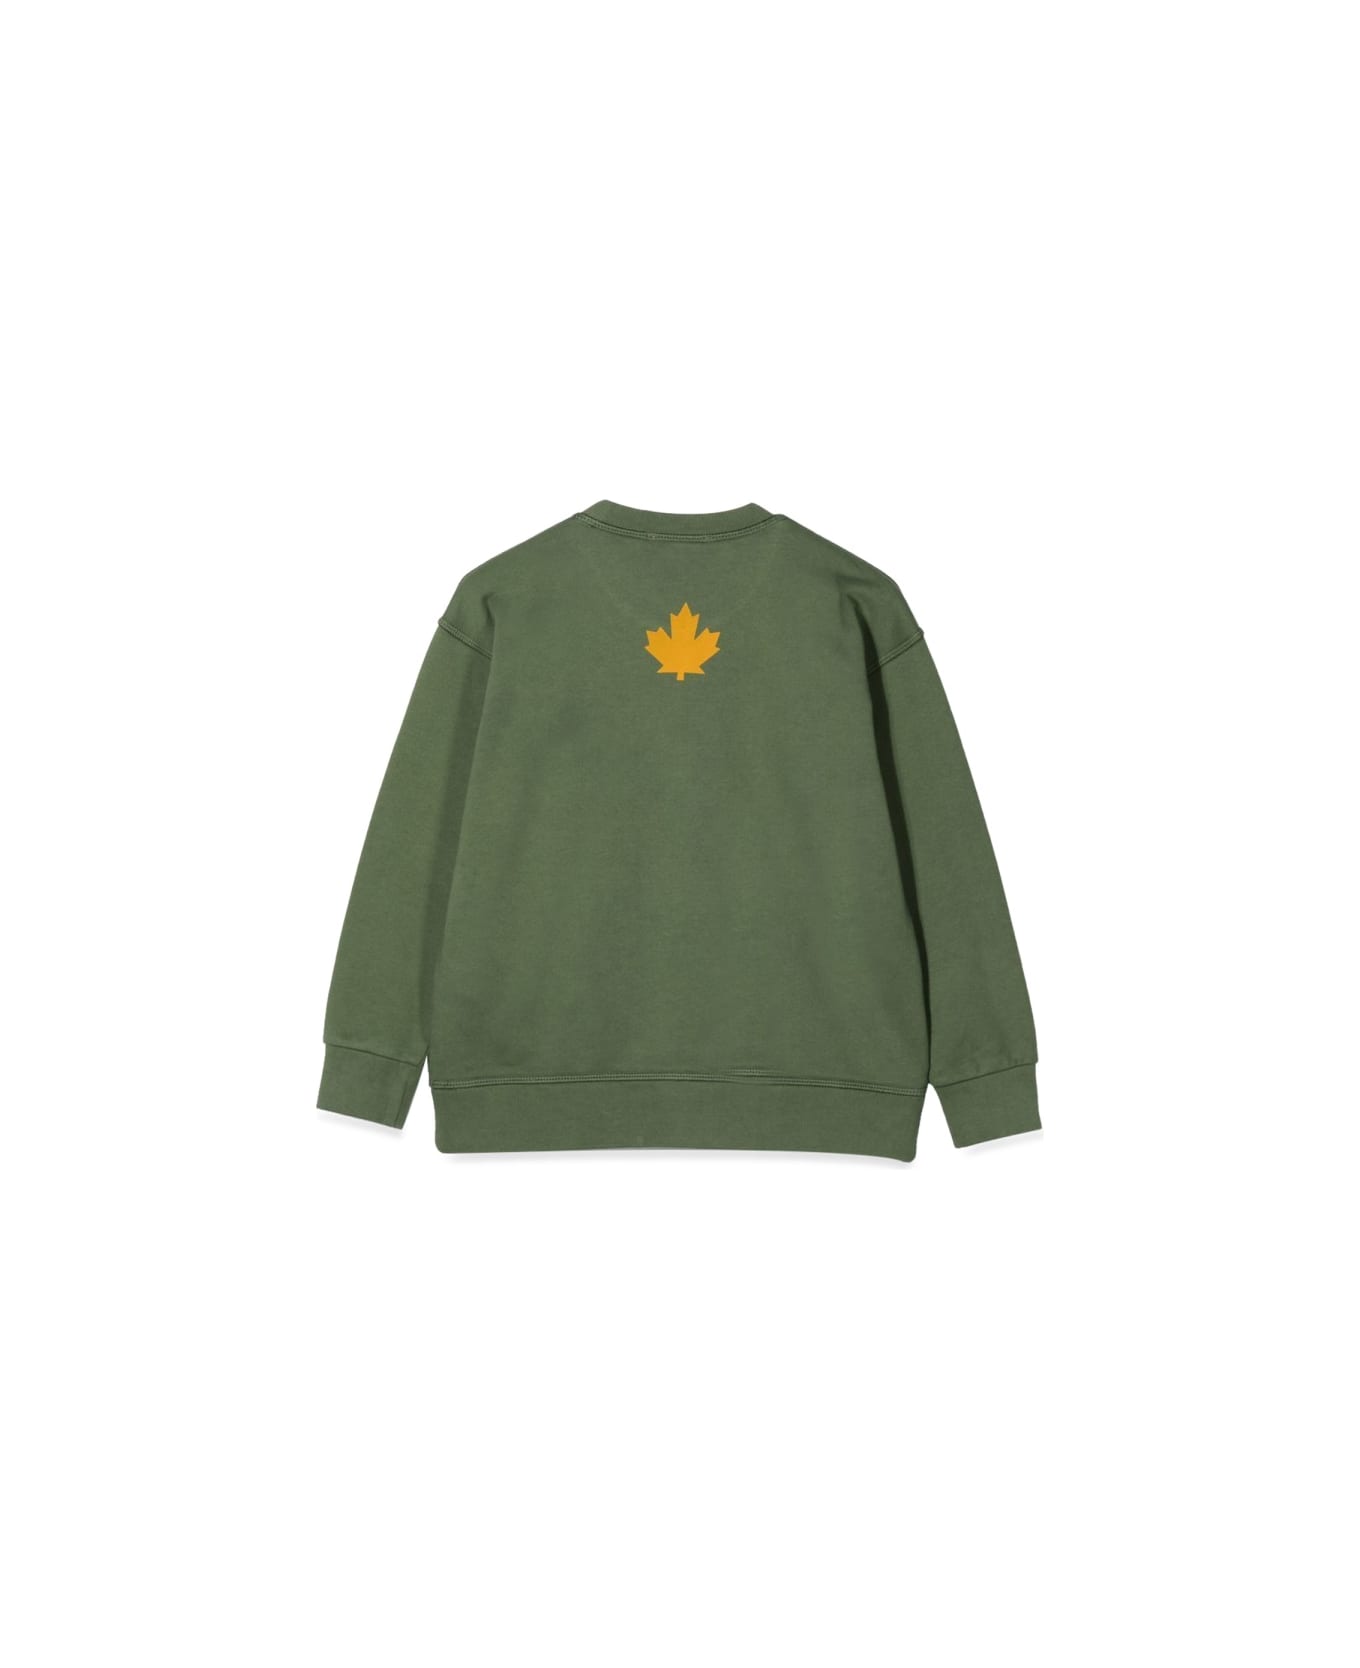 Dsquared2 One Life One Planet Sweatshirt - GREEN